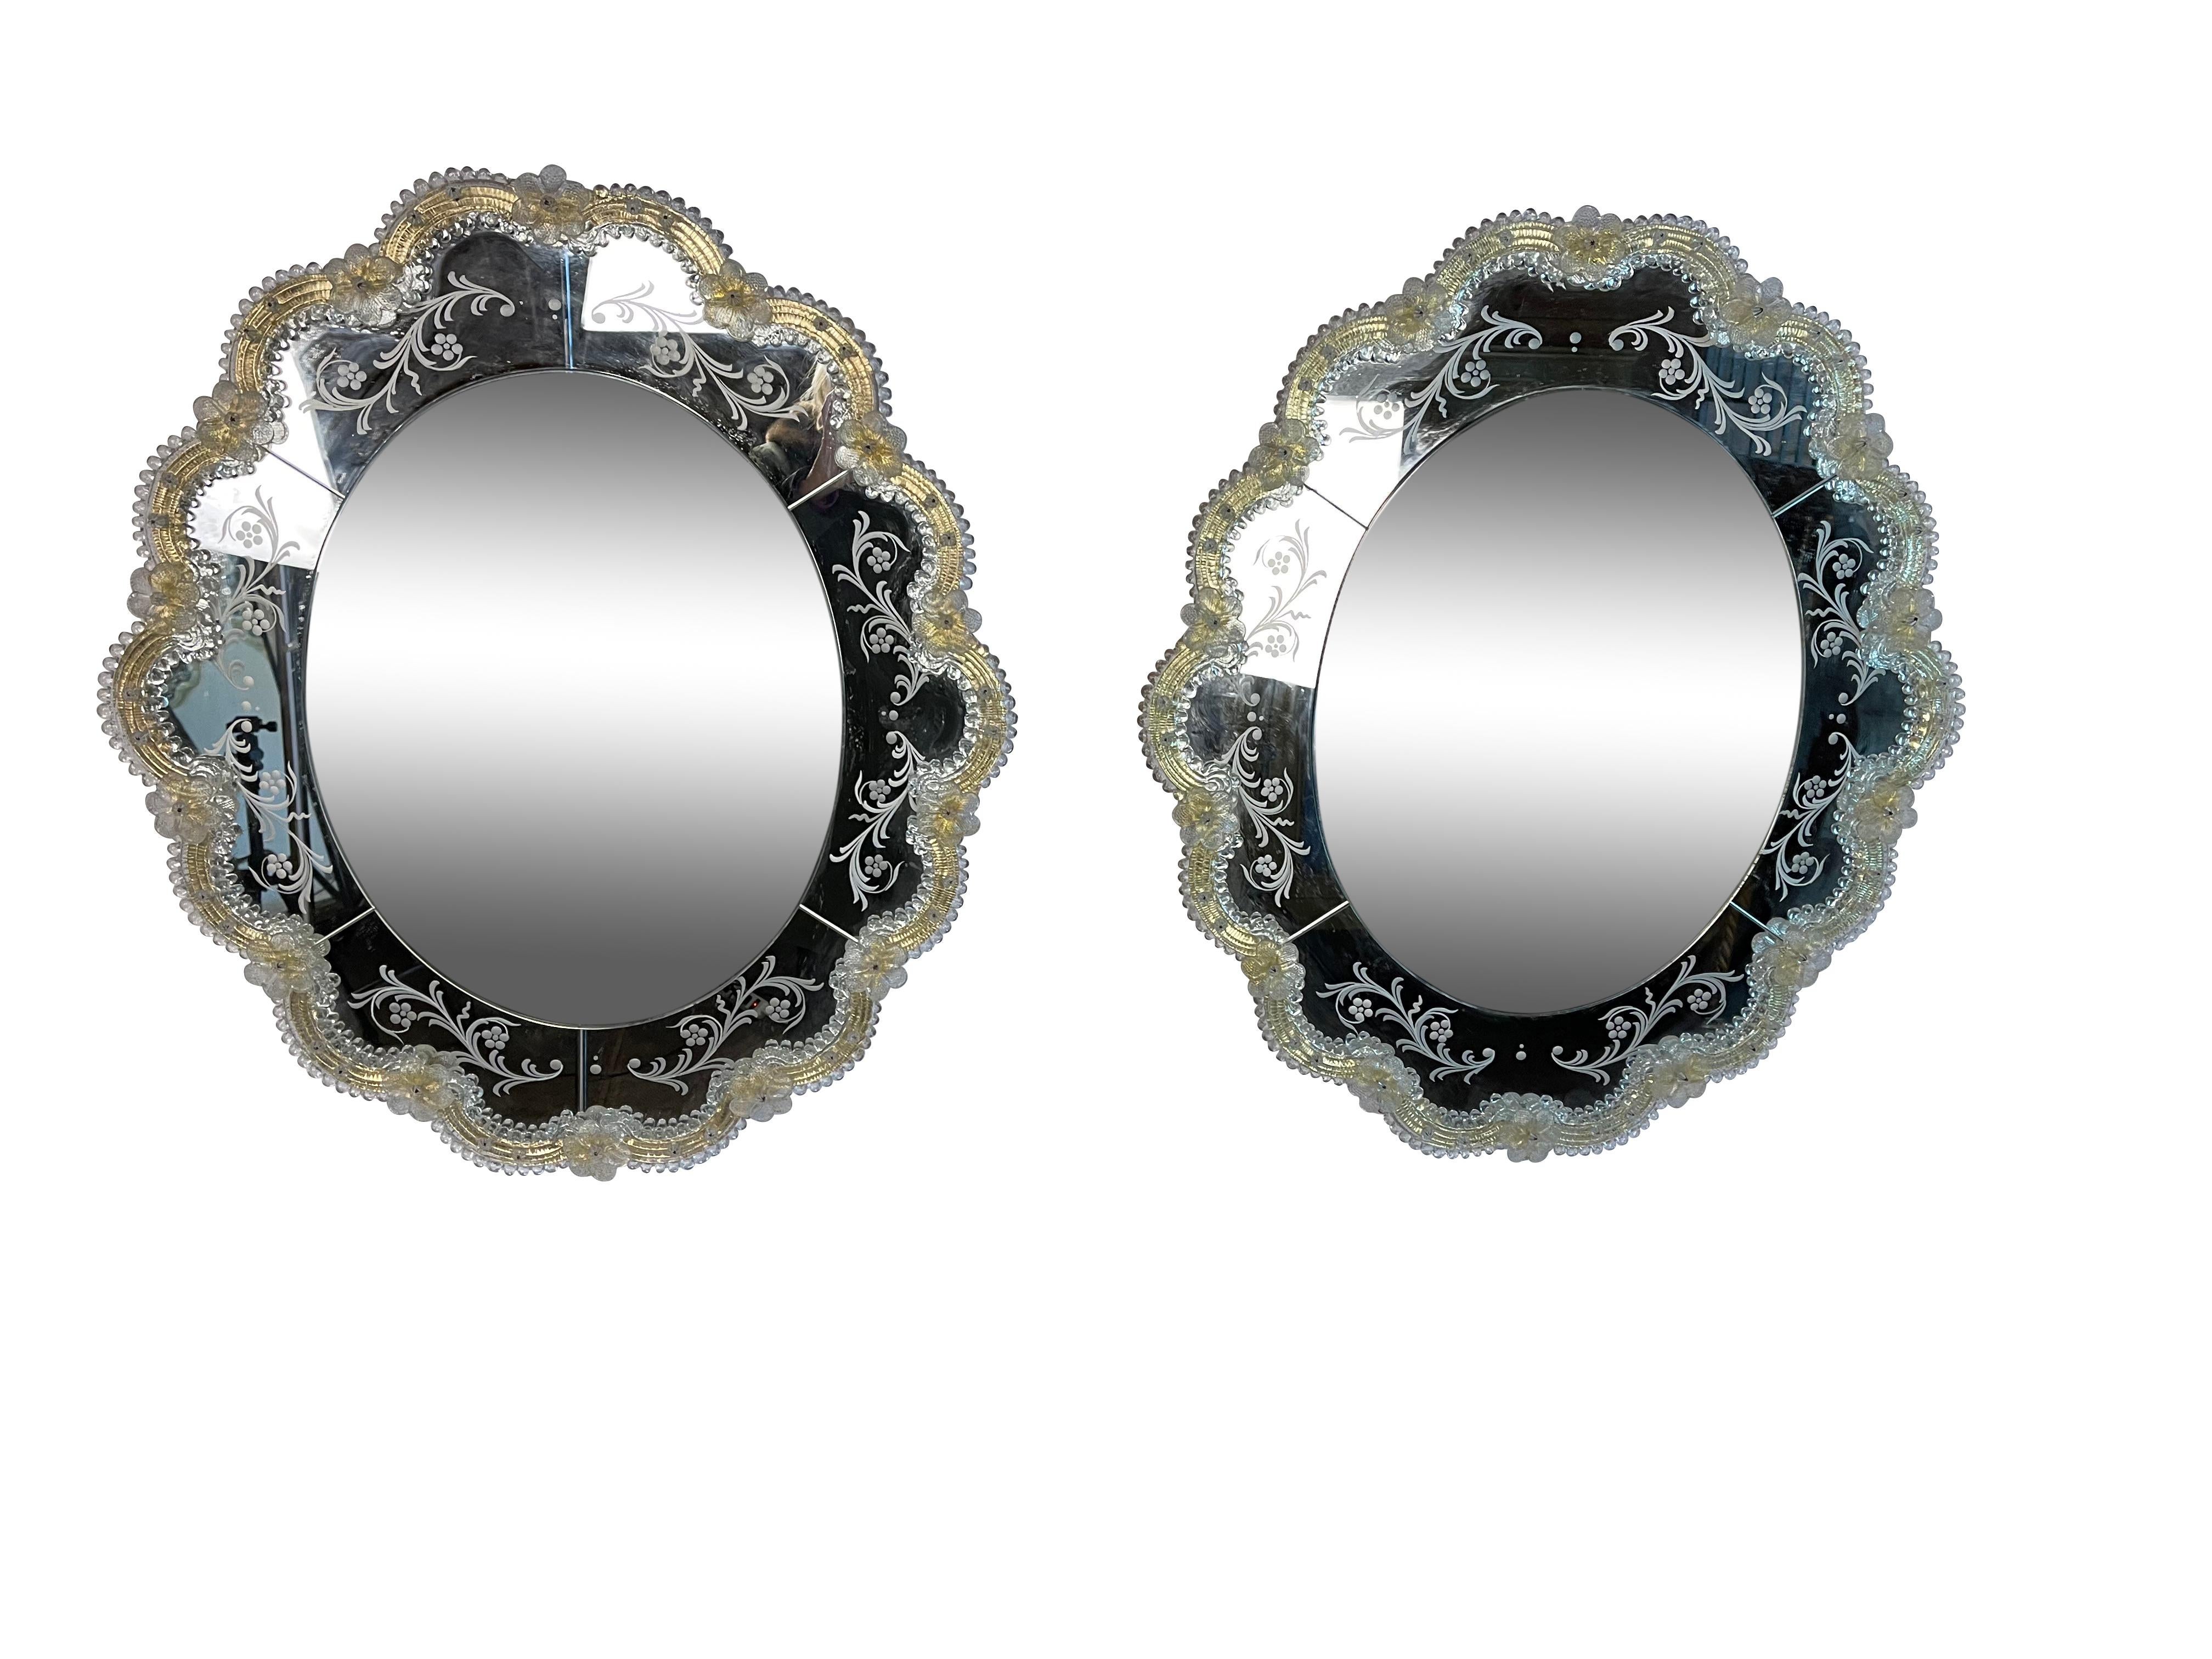 Pair of new Murano glass oval mirrors with gold glass accents. Finely etched with floral decoration measuring 27 H x 24 W x 1.50 D.